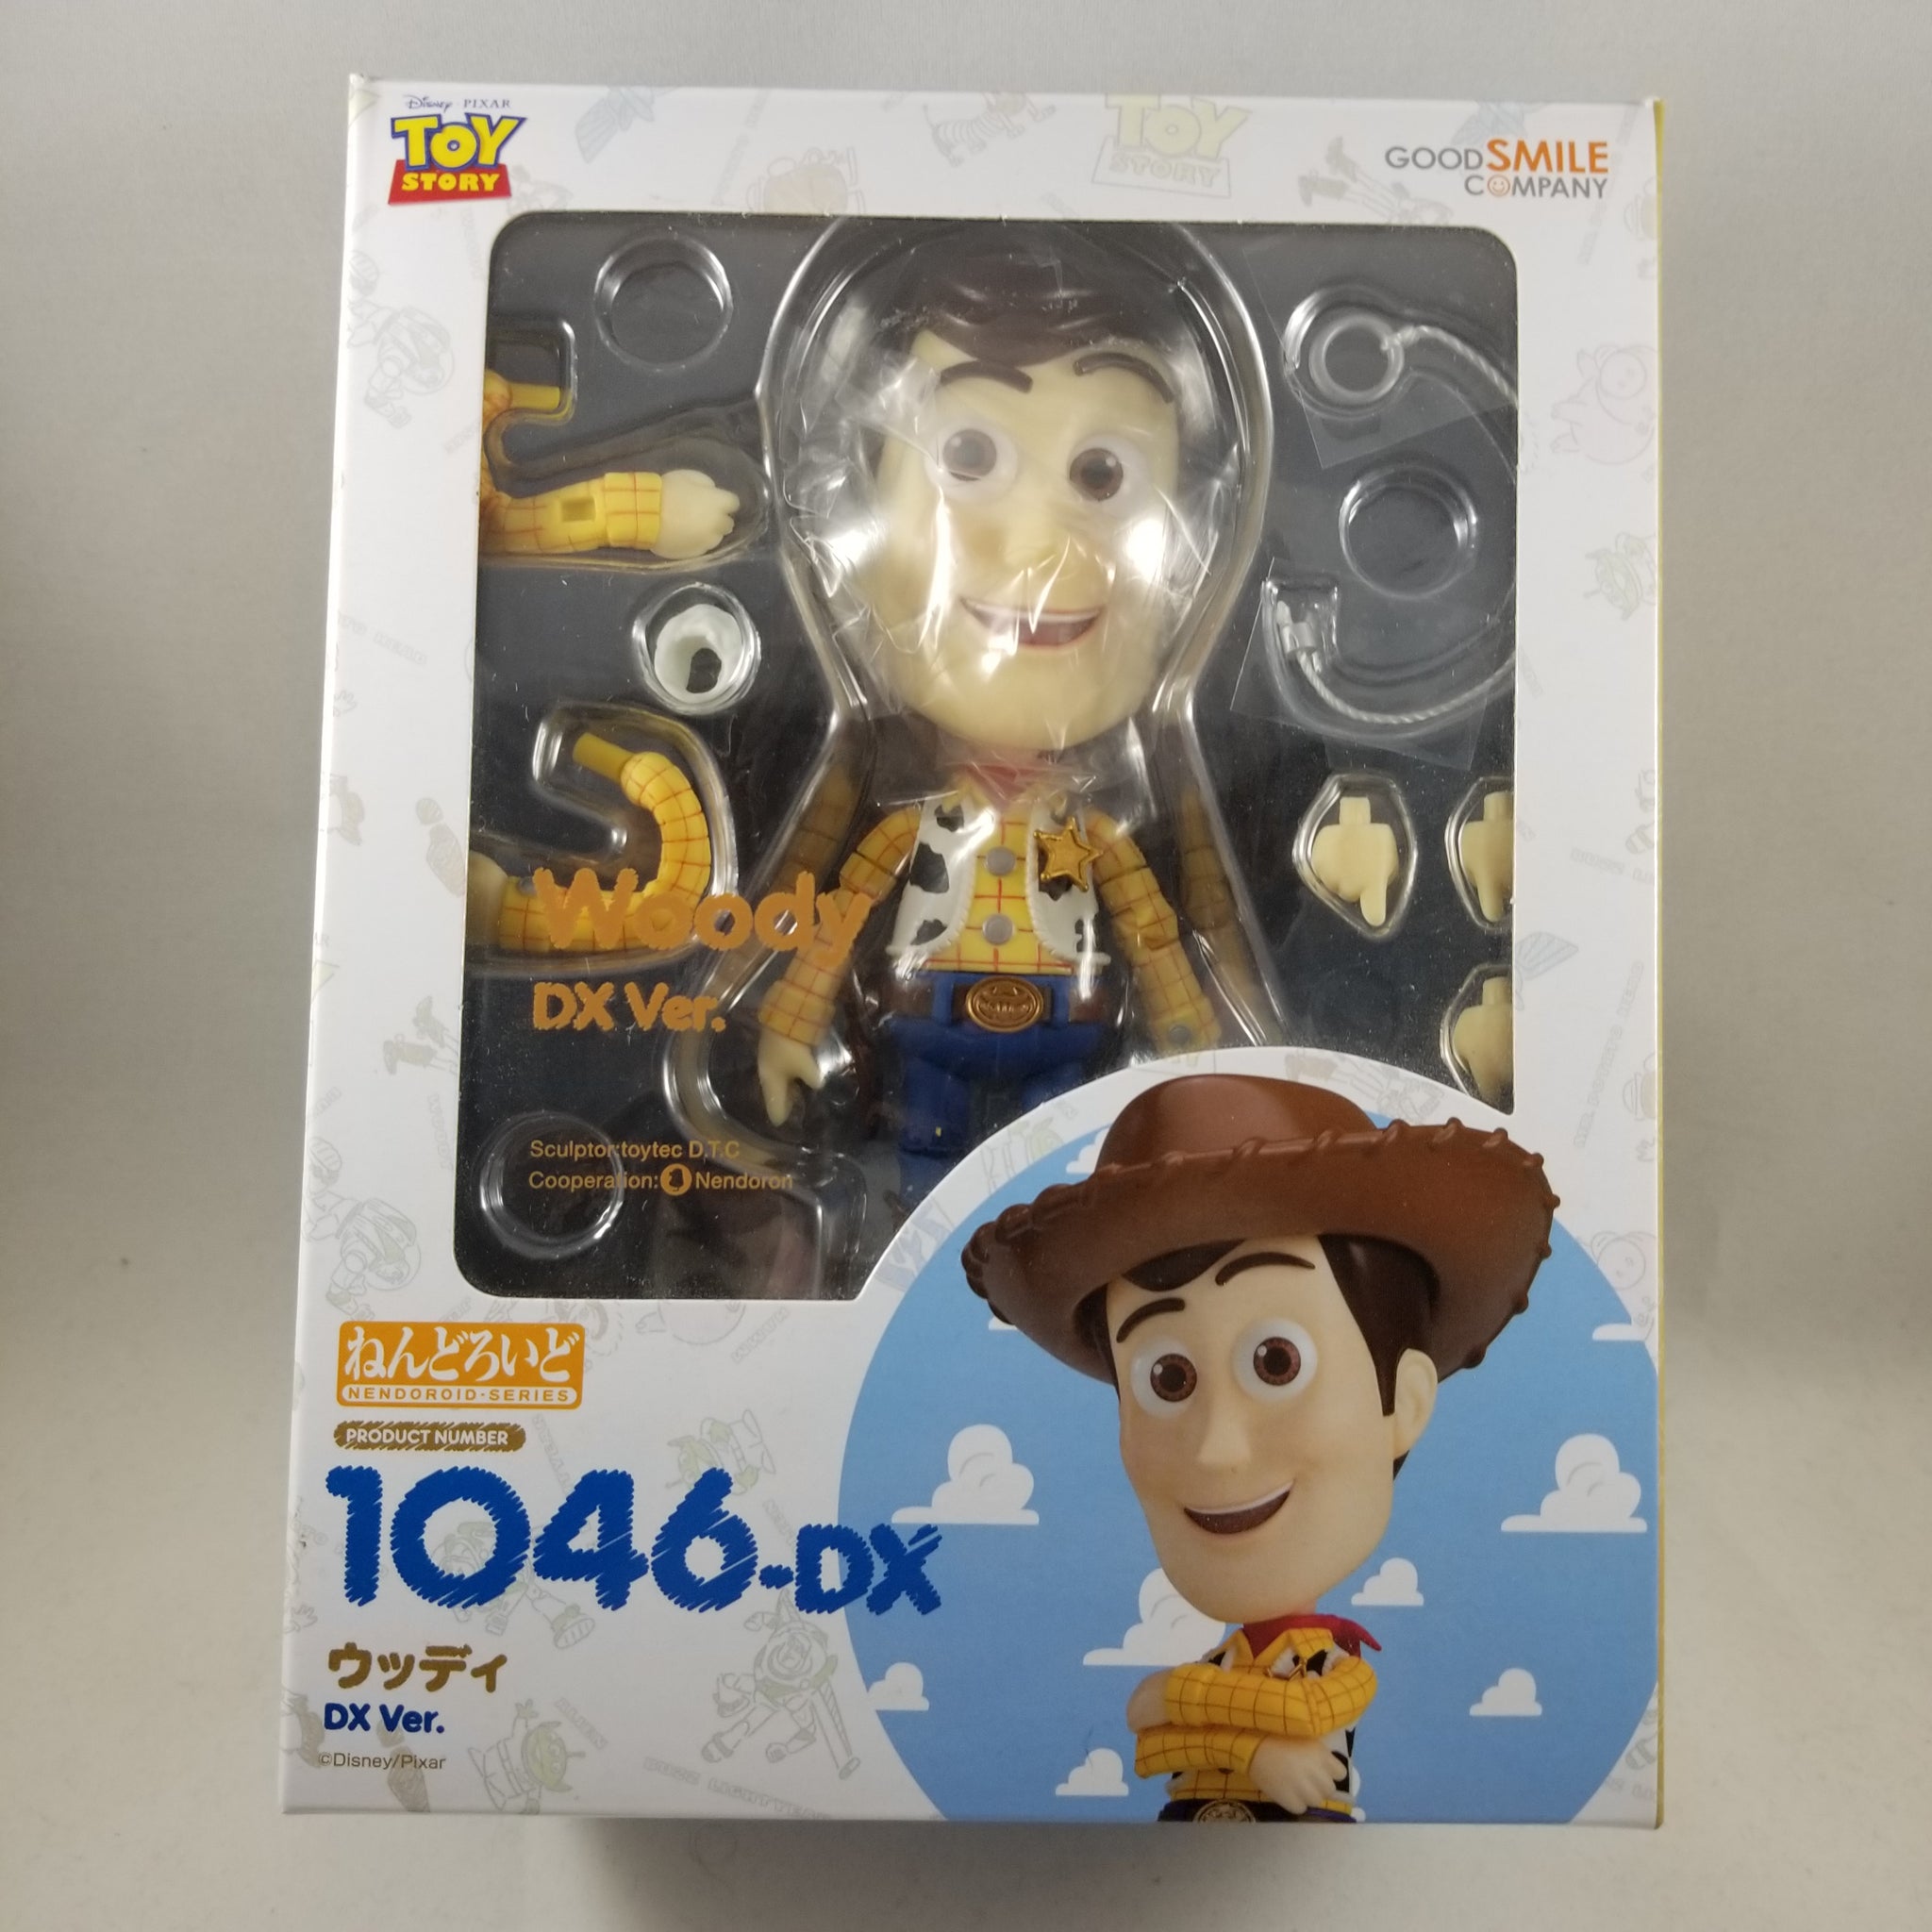 1046-Dx -Woody Dx Vers. Complete in Box| Chibi Chop Shop